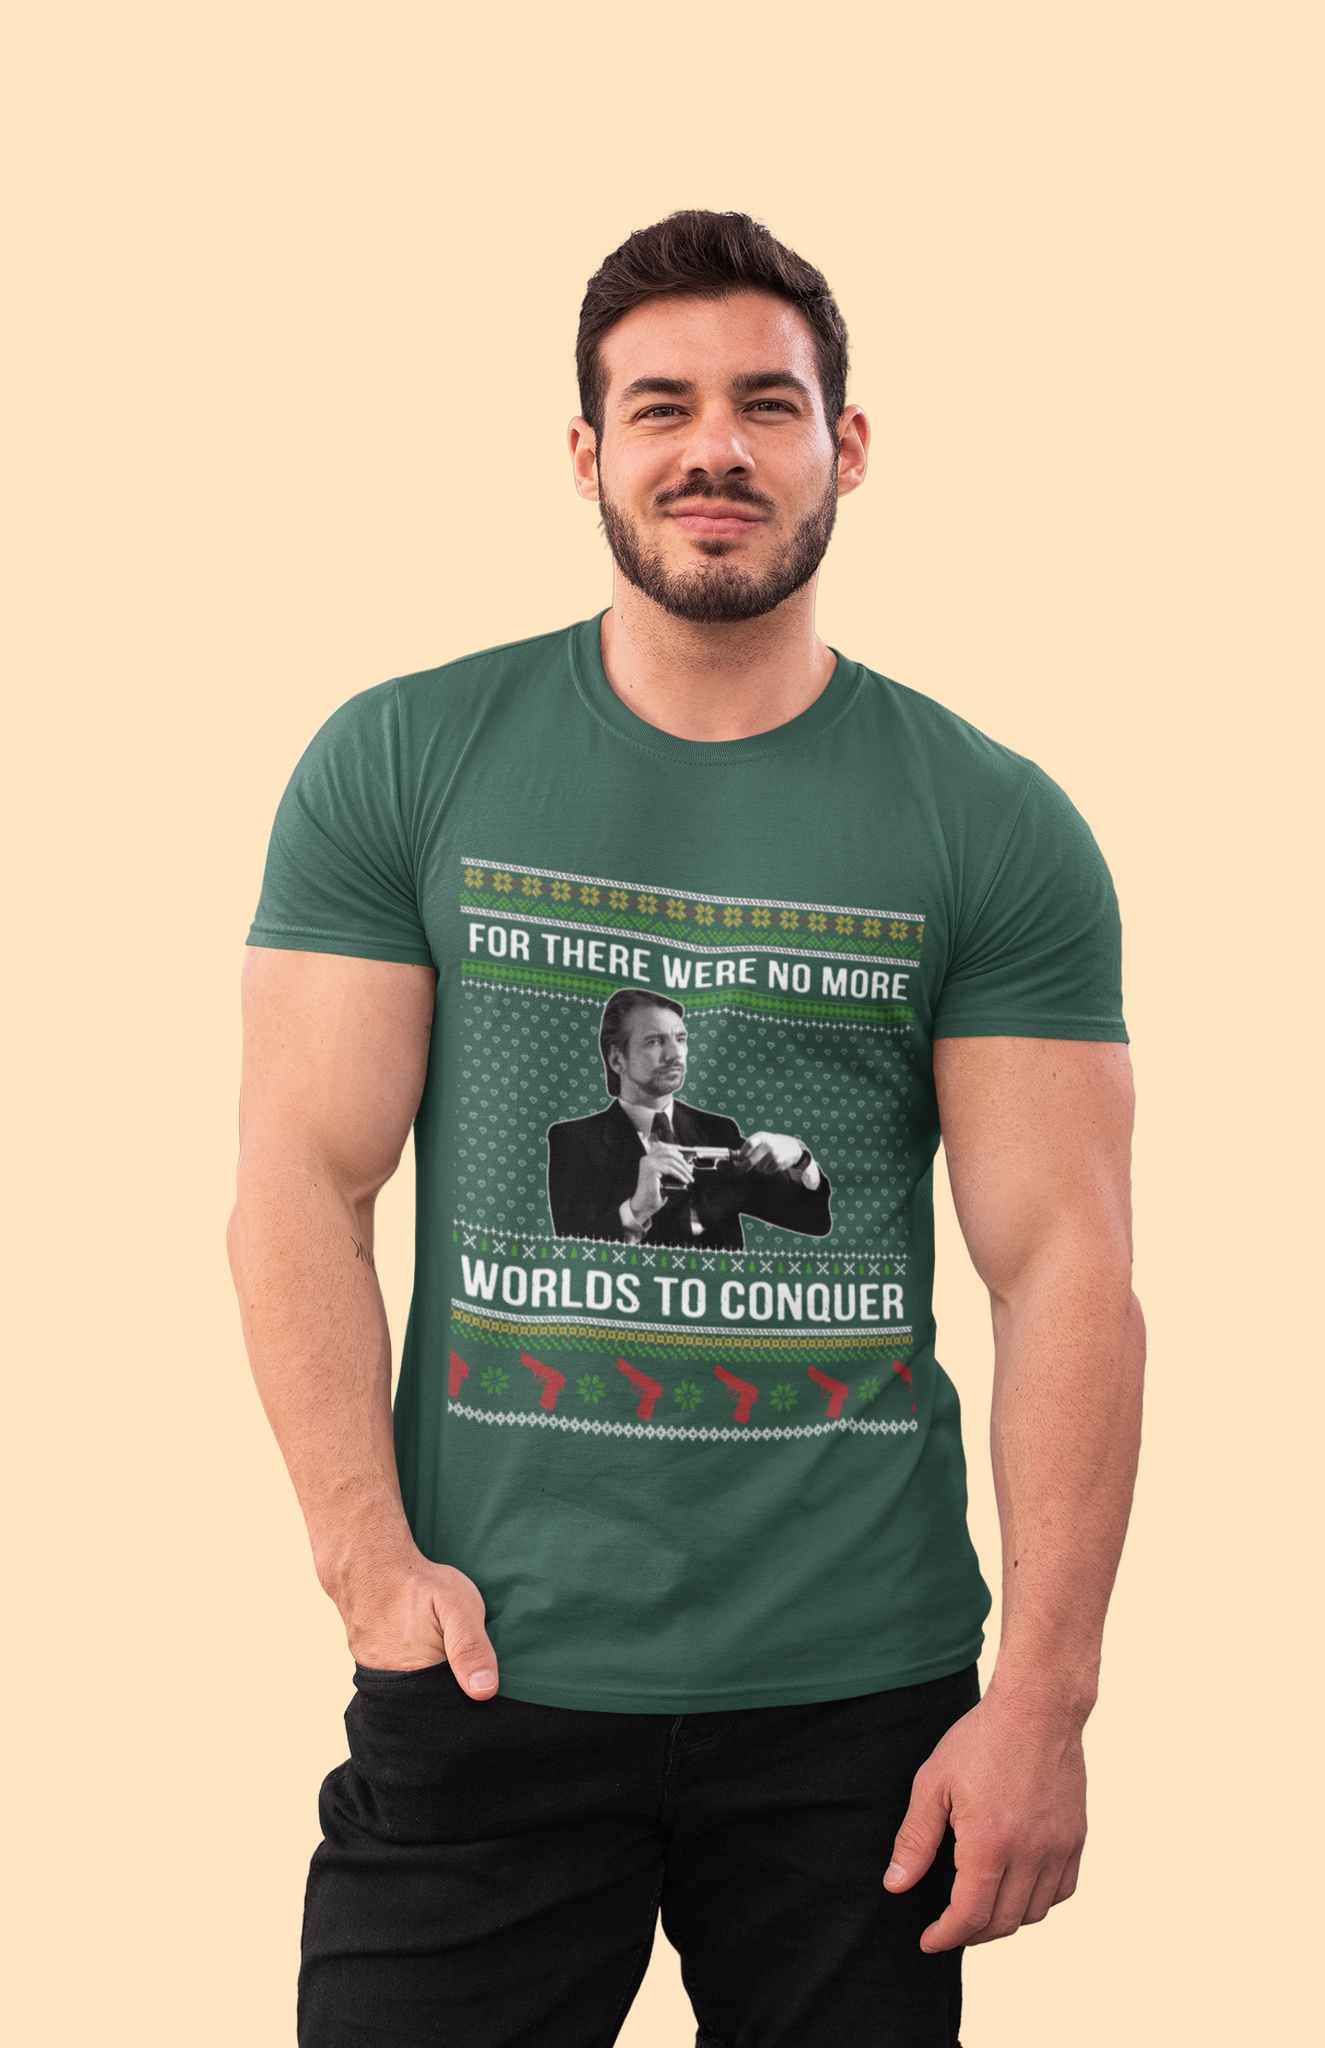 Die Hard Movie T Shirt, Hans Gruber T Shirt, For There Were No More Worlds To Conquer Tshirt, Christmas Gift